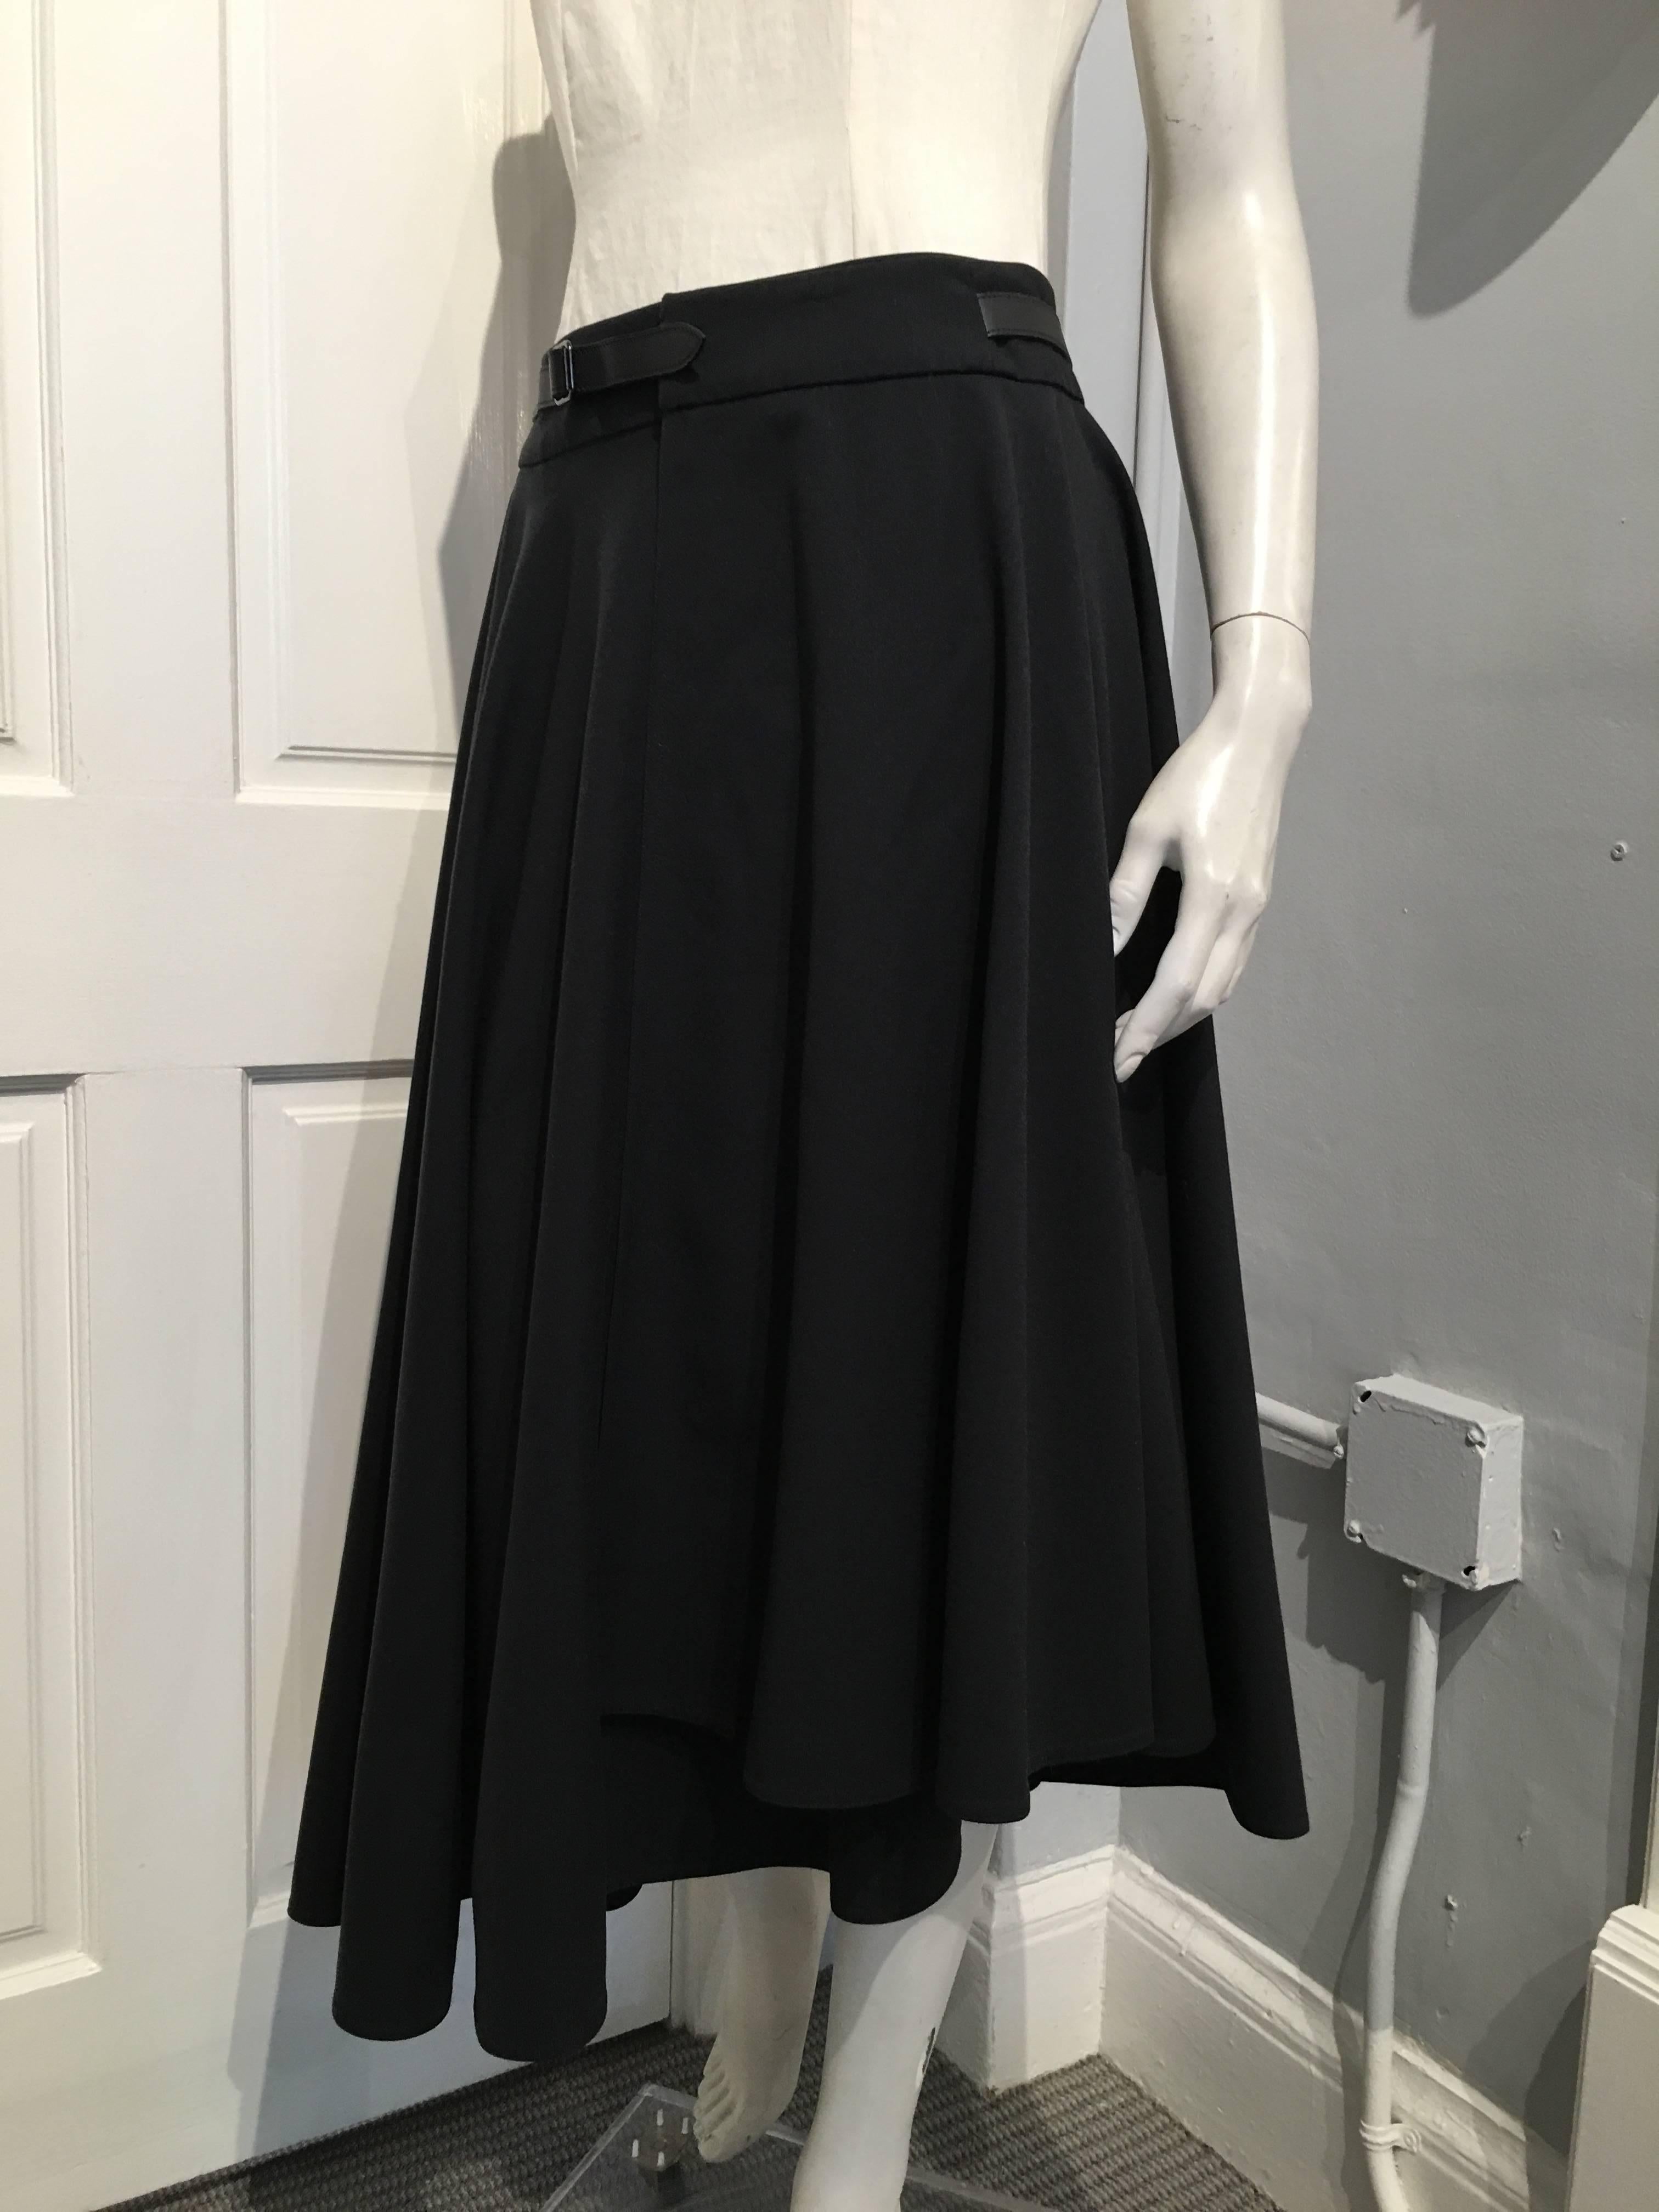 Flared Hermes black wool wrap skirt with an asymmetrical hem from the Fall 2014 collection. It has one pocket on the right side, and an adjustable calfskin belt sewn onto it.